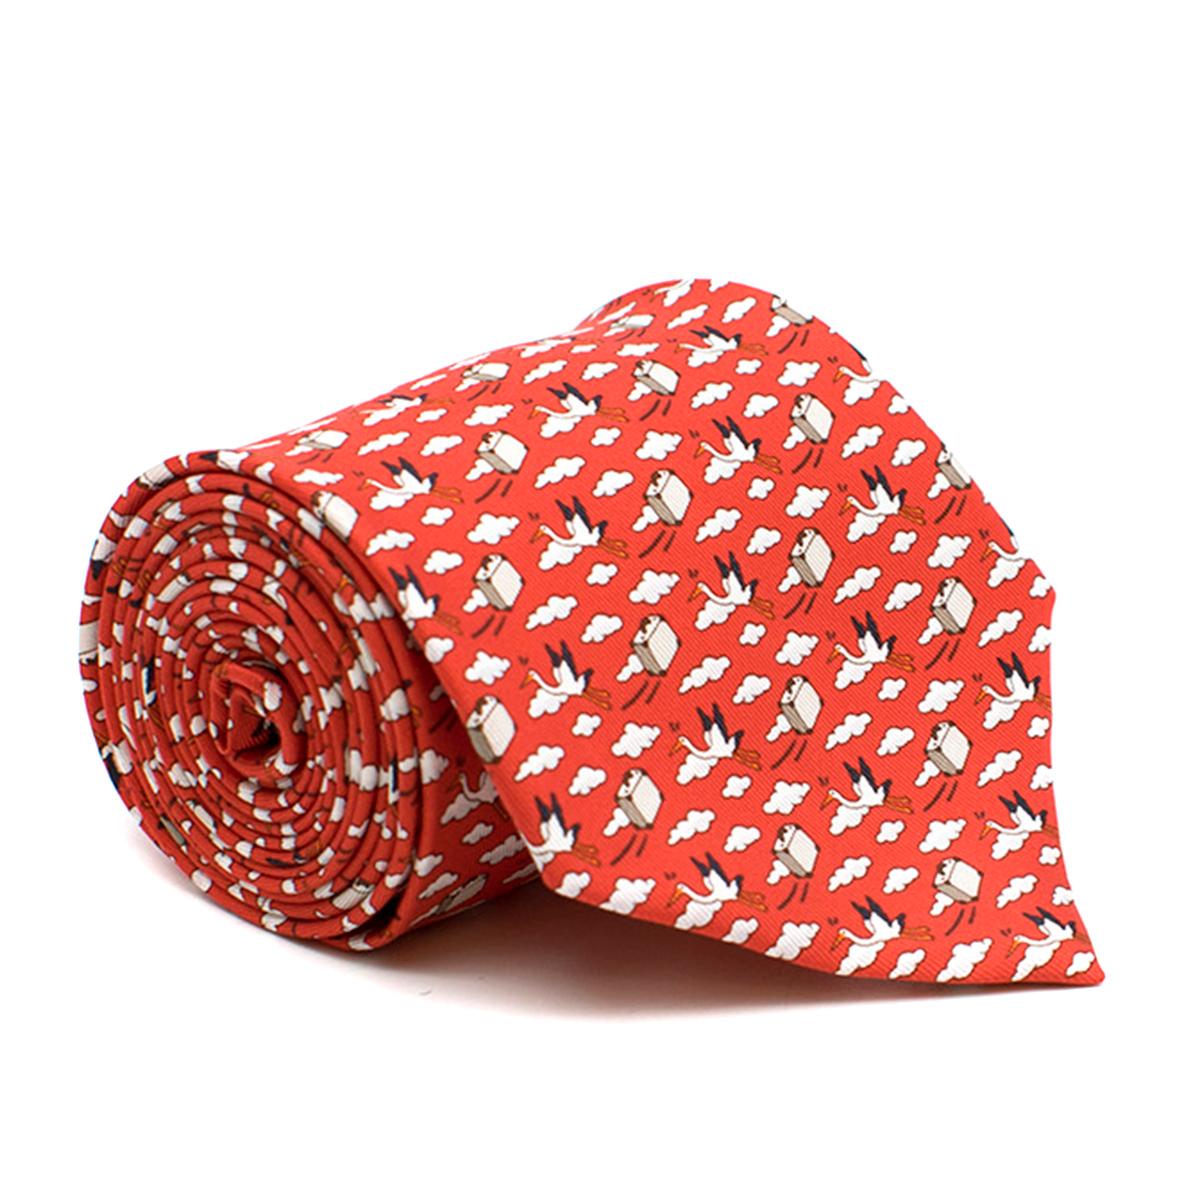 Hermes Red Bird Express Silk Tie

- Red tie
- Bird express print
- 100% silk
- Never Worn Still With Tags


Please note, these items are pre-owned and may show some signs of storage, even when unworn and unused. This is reflected within the